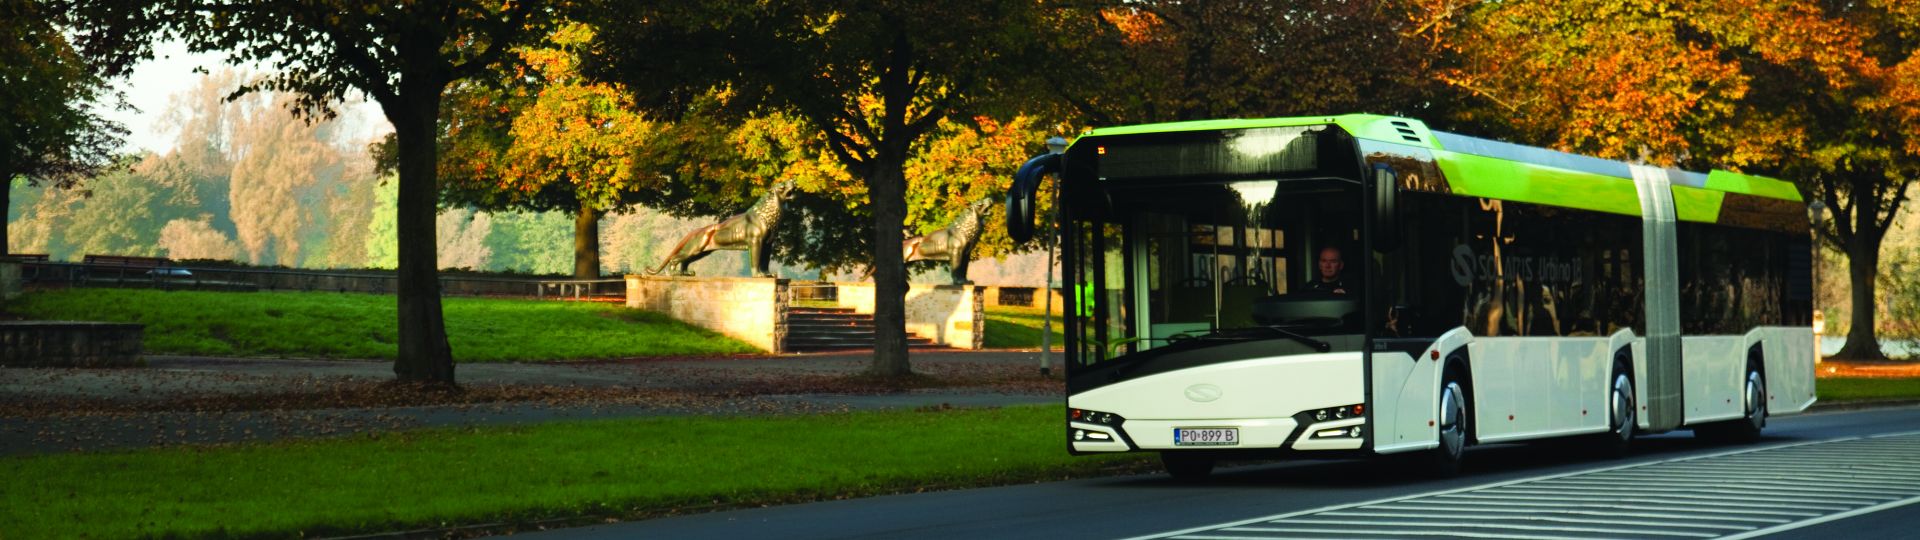 Record contract for 150 Solaris buses for Vilnius underway